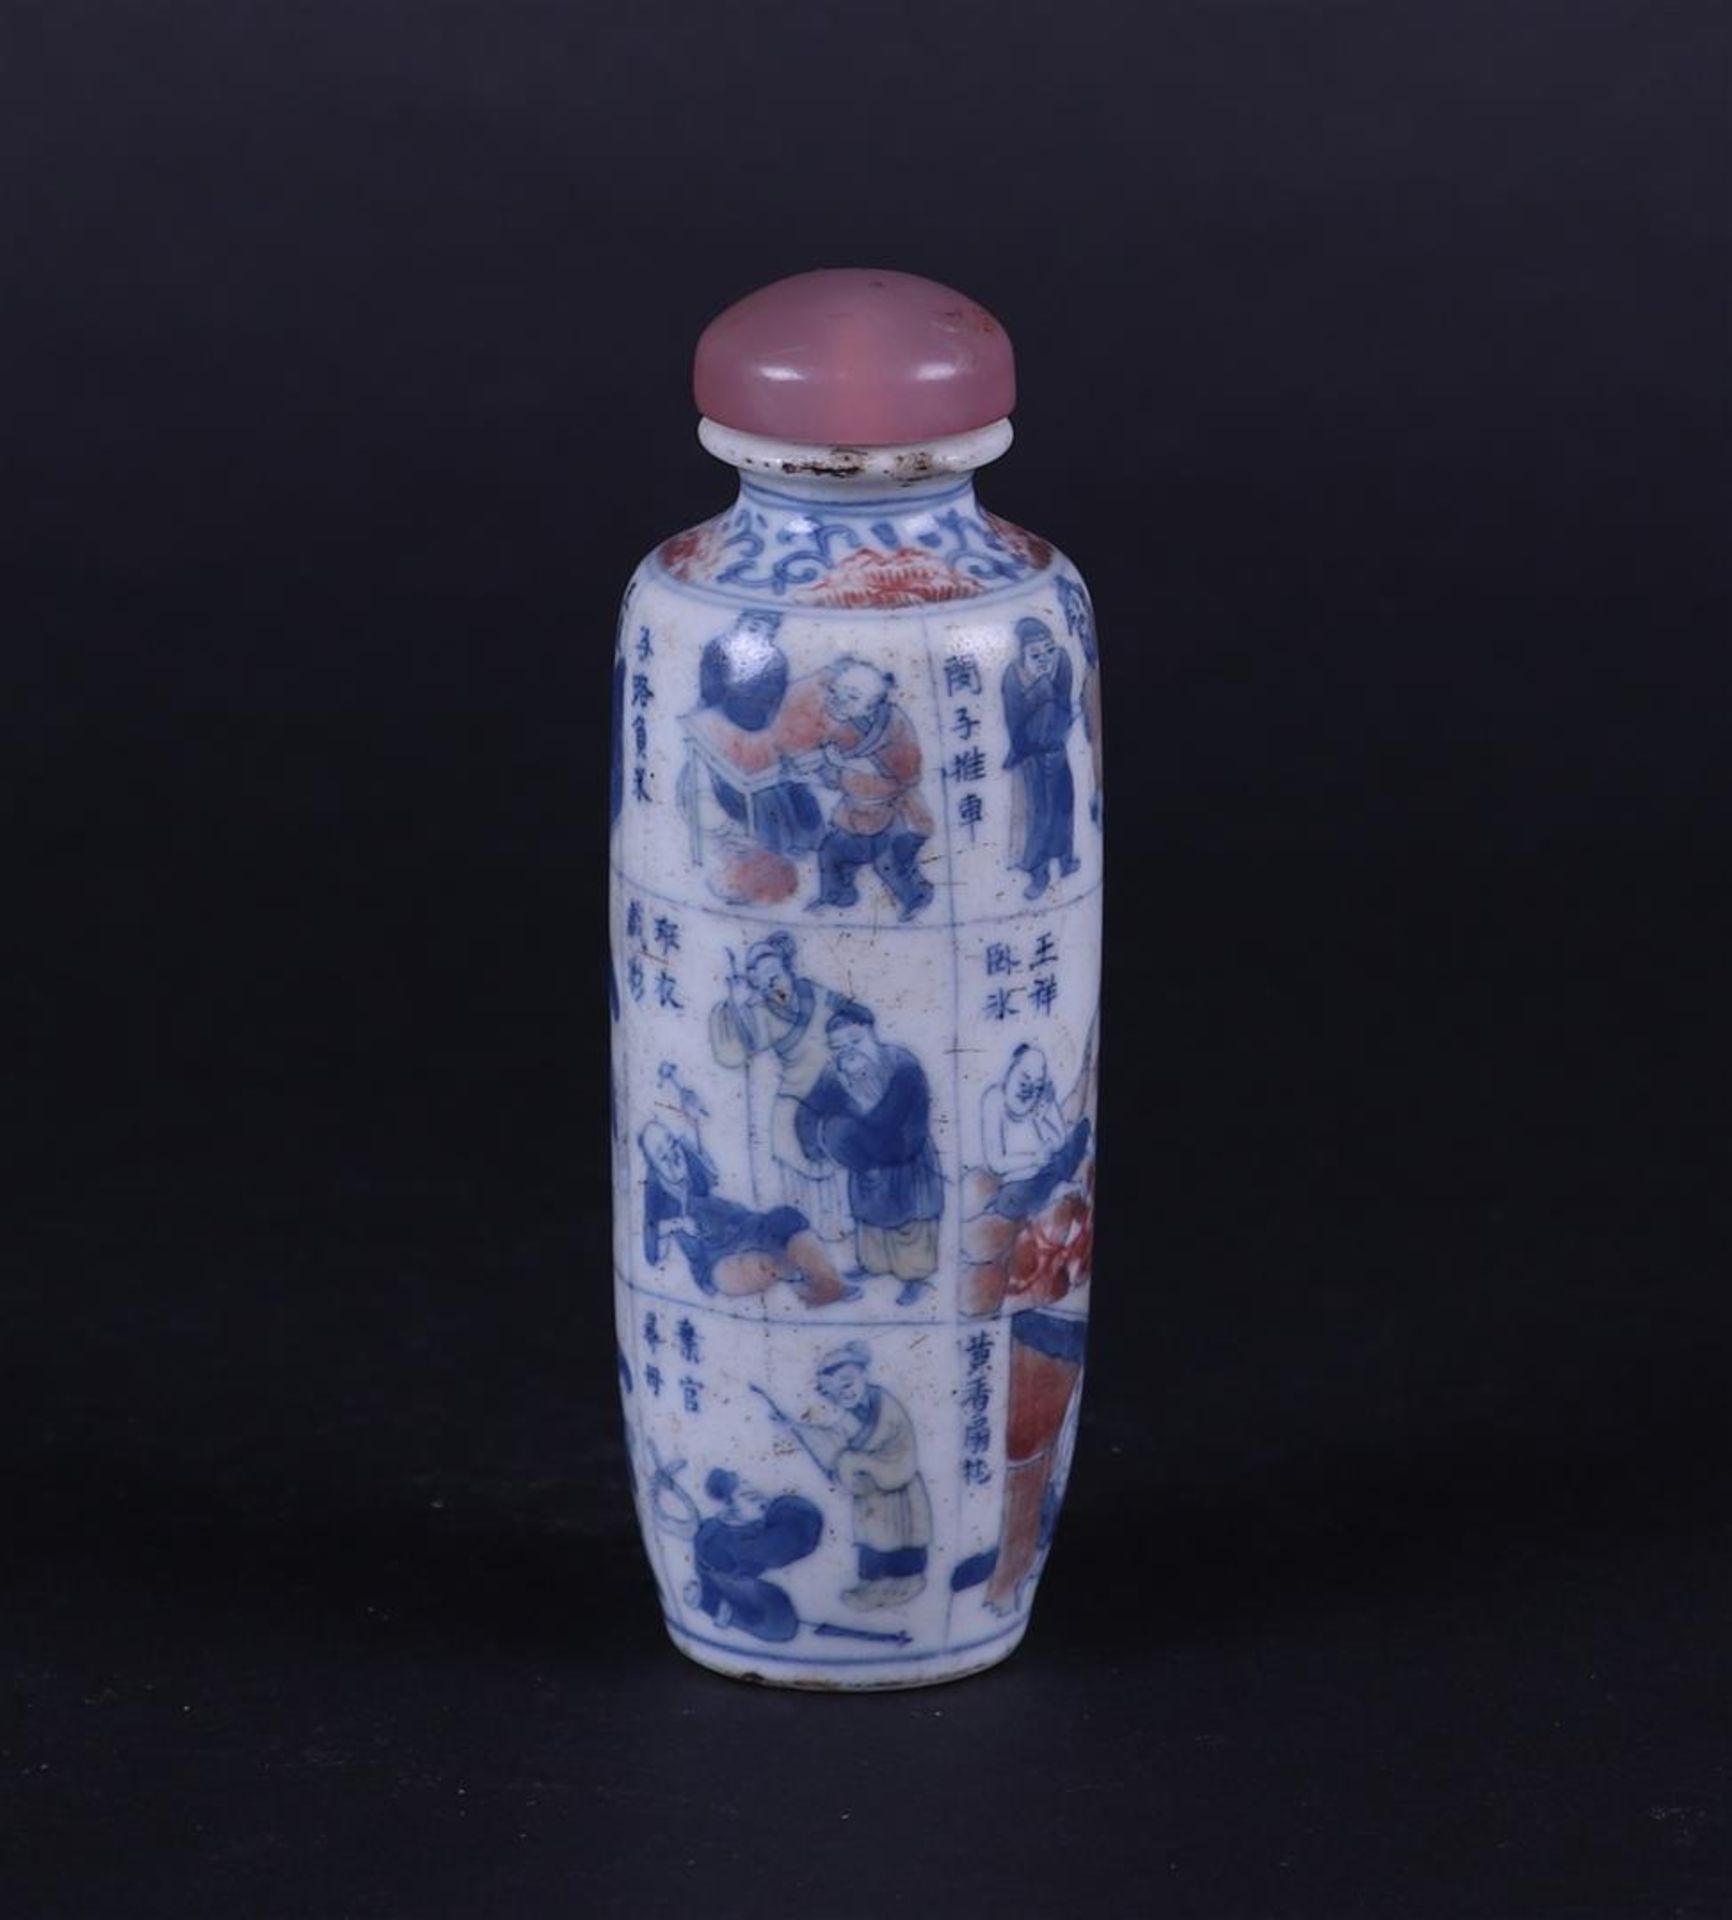 A porcelain snuff bottle with a narrative decor of figures and Chinese text in each compartment.  - Image 2 of 3